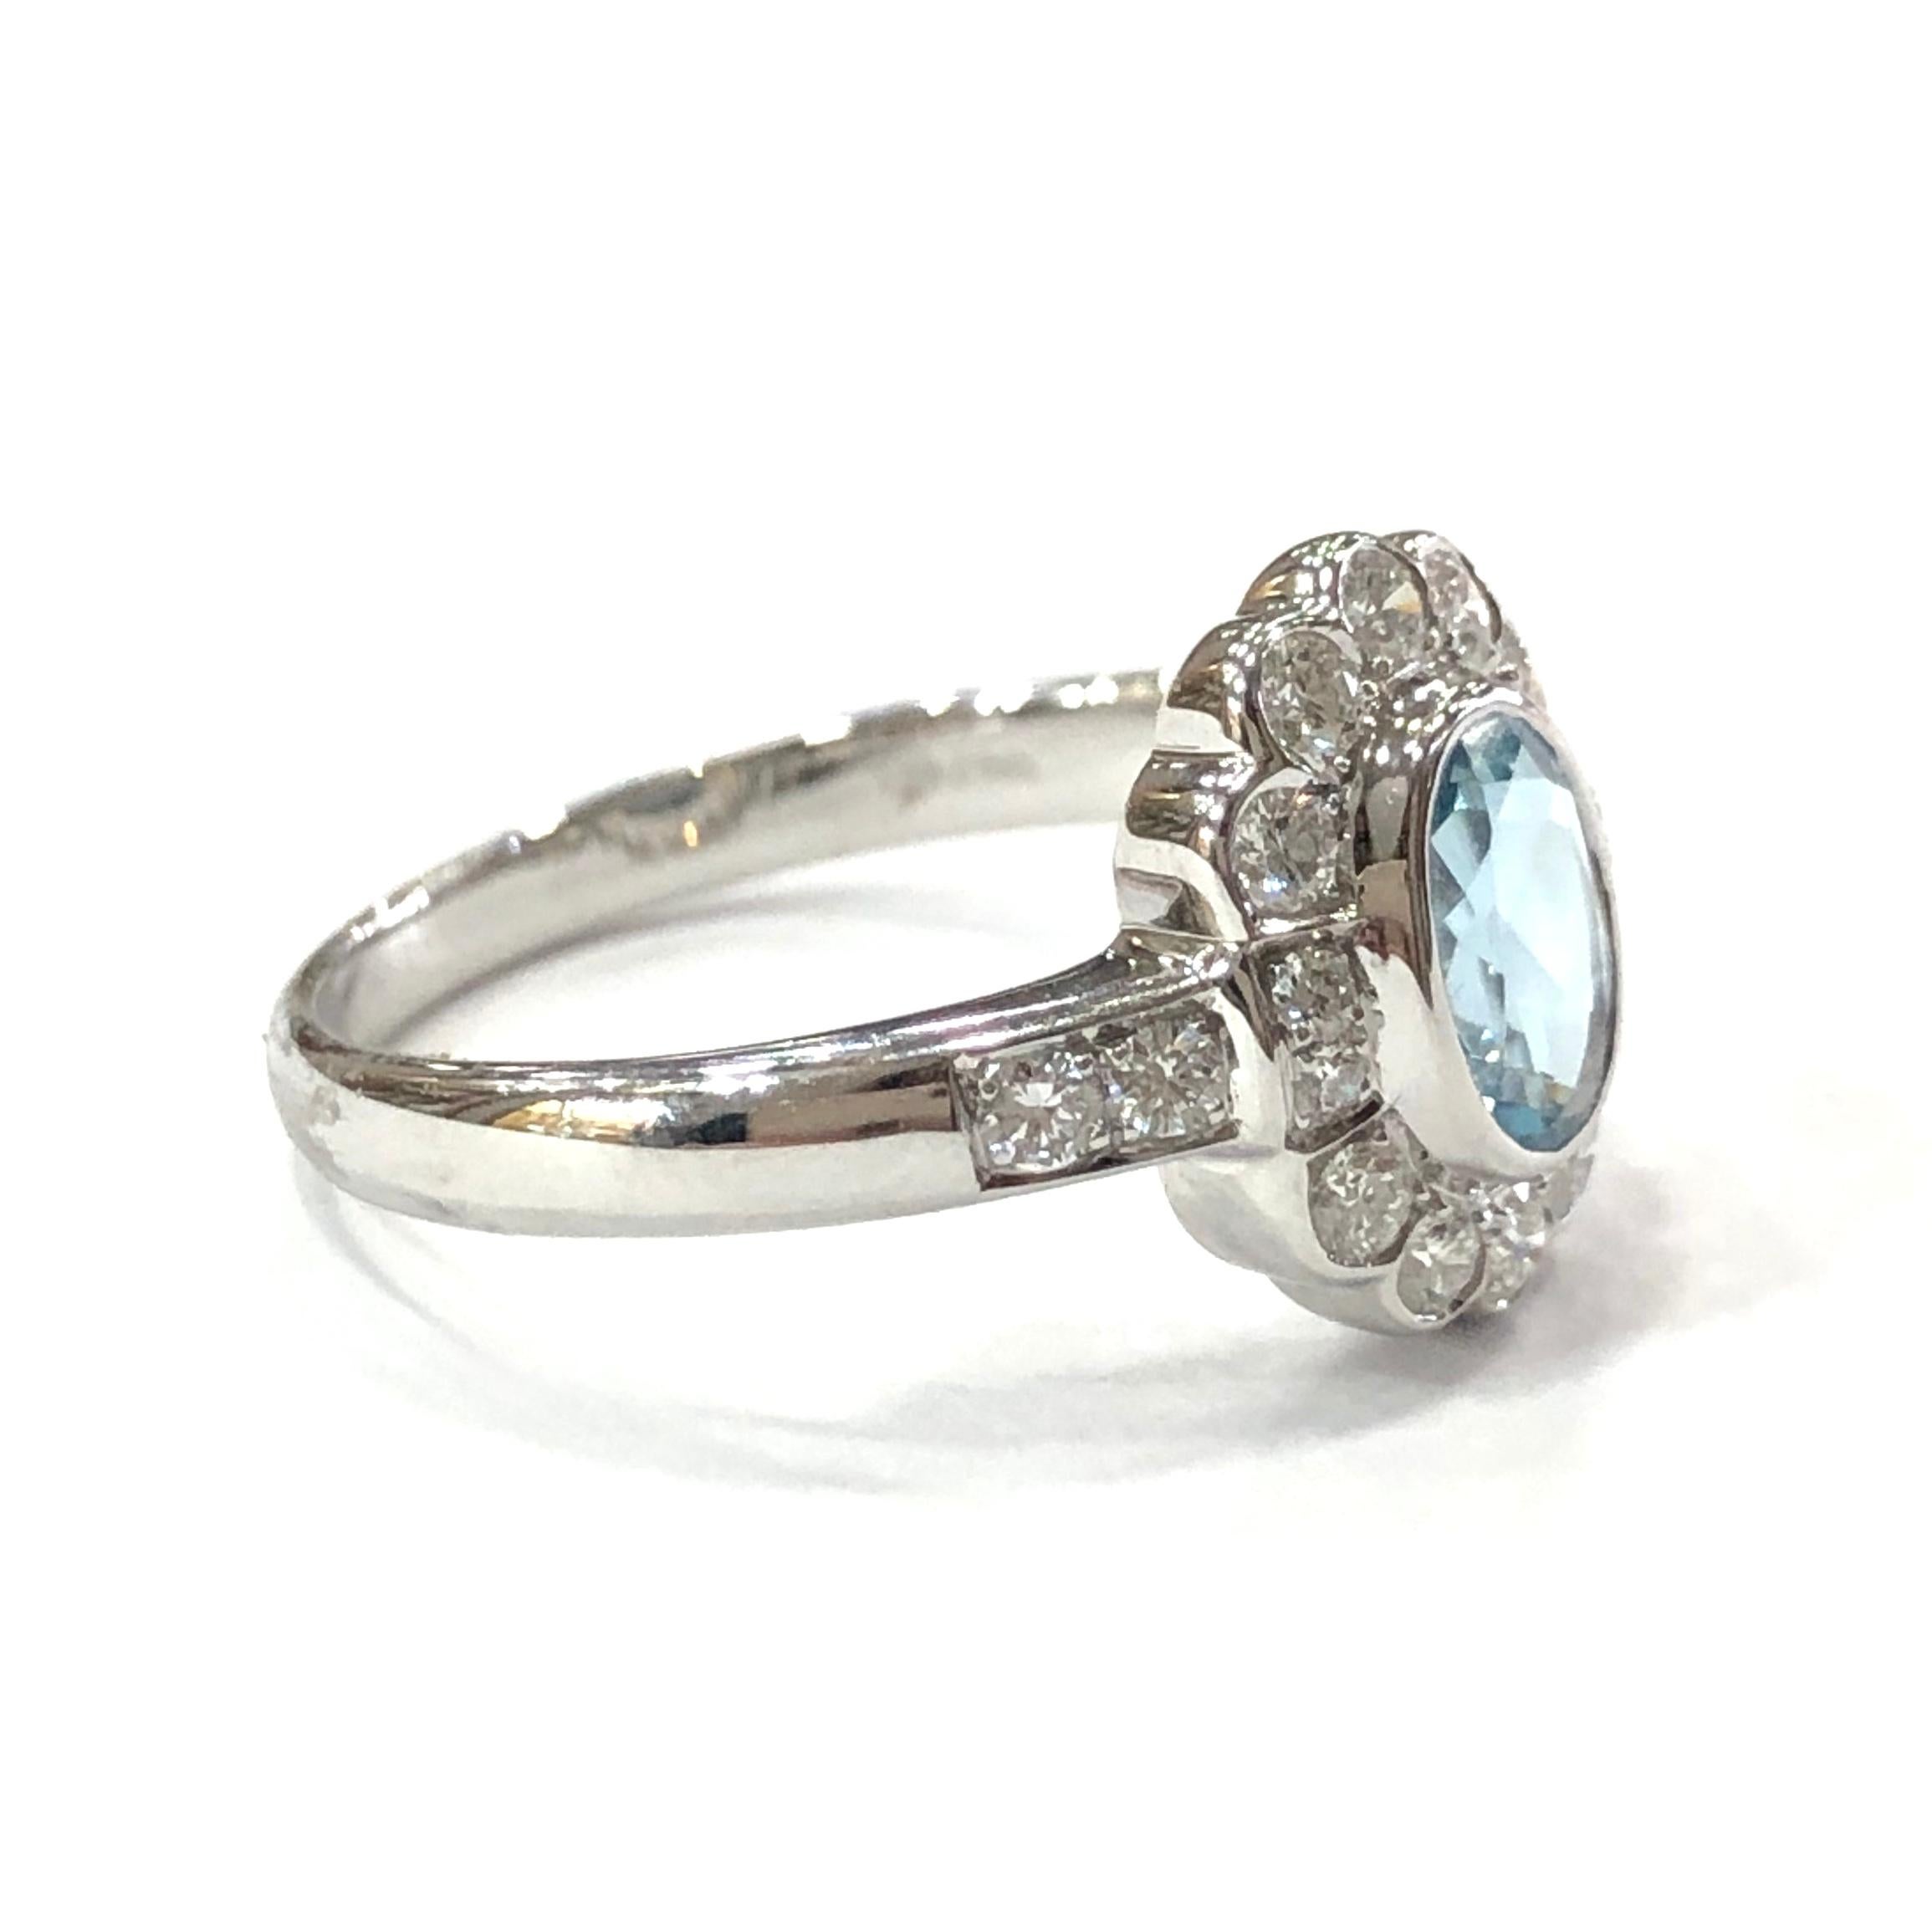 18ct White Gold Aquamarine and Diamond Cluster Ring. Set with a central oval Aquamarine set in a rubover setting. Surrounded by 14 round brilliant cut Diamonds and 4 round brilliant cut diamonds set on the shoulders.
With a full english